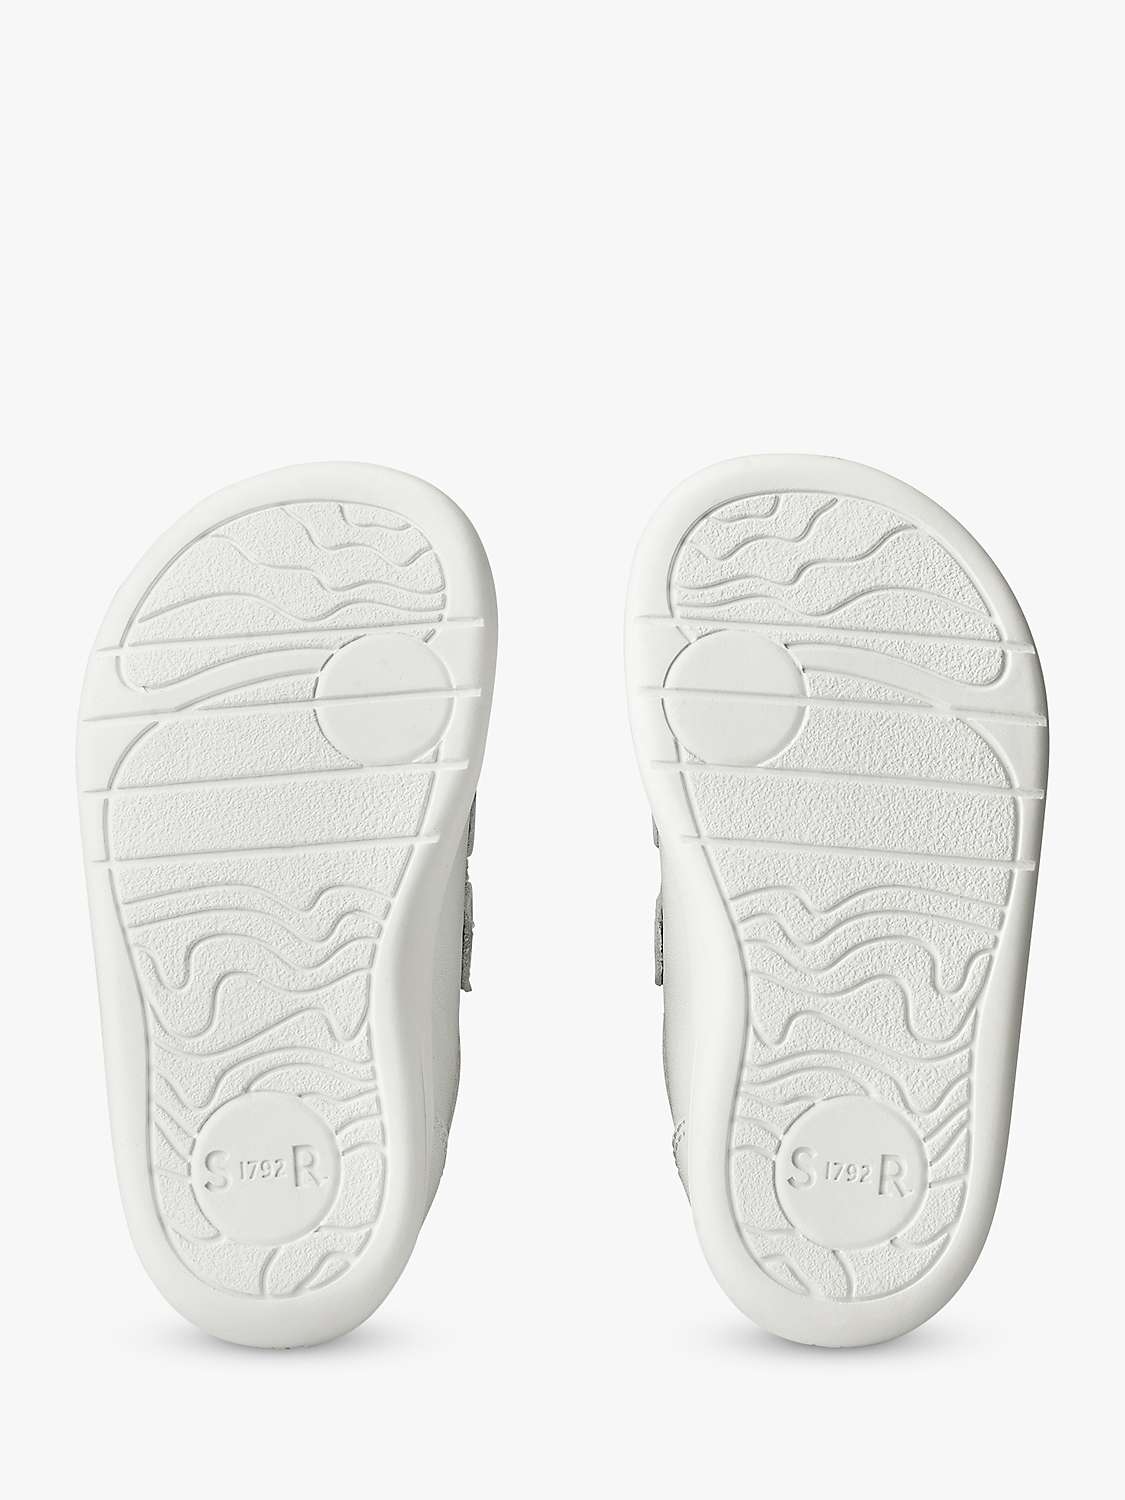 Buy Start-Rite Baby Maze Leather Pre Walker Shoes, White Online at johnlewis.com